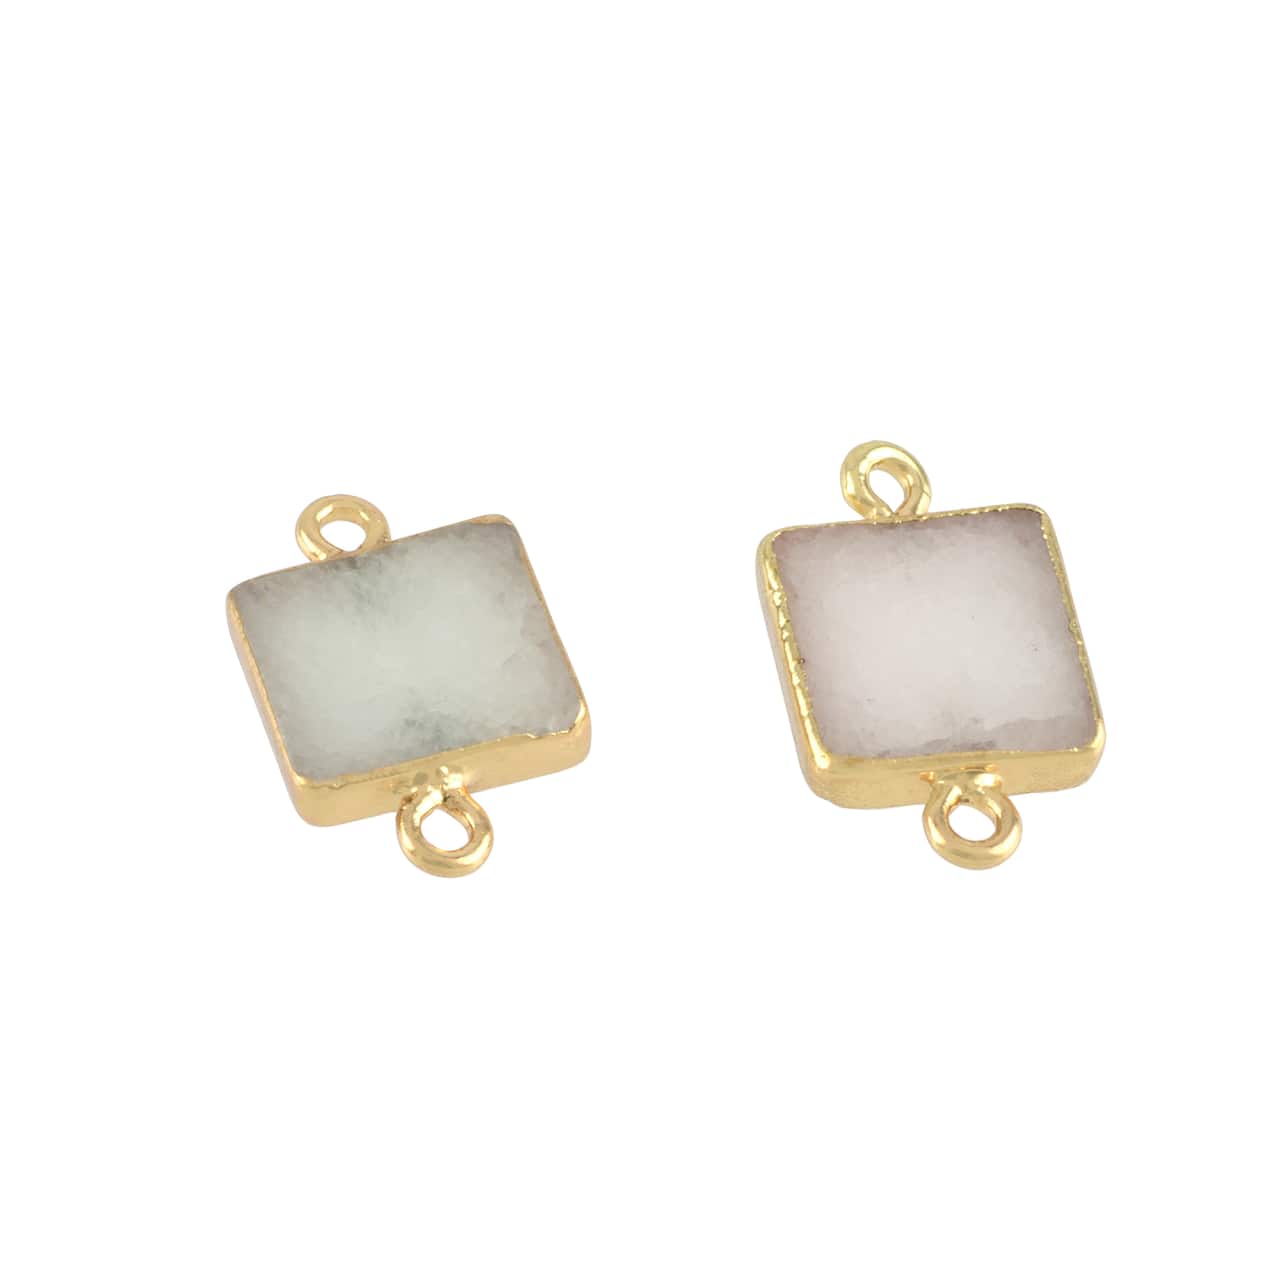 19mm Dyed Jade Square Connectors, 2ct. by Bead Landing&#x2122;